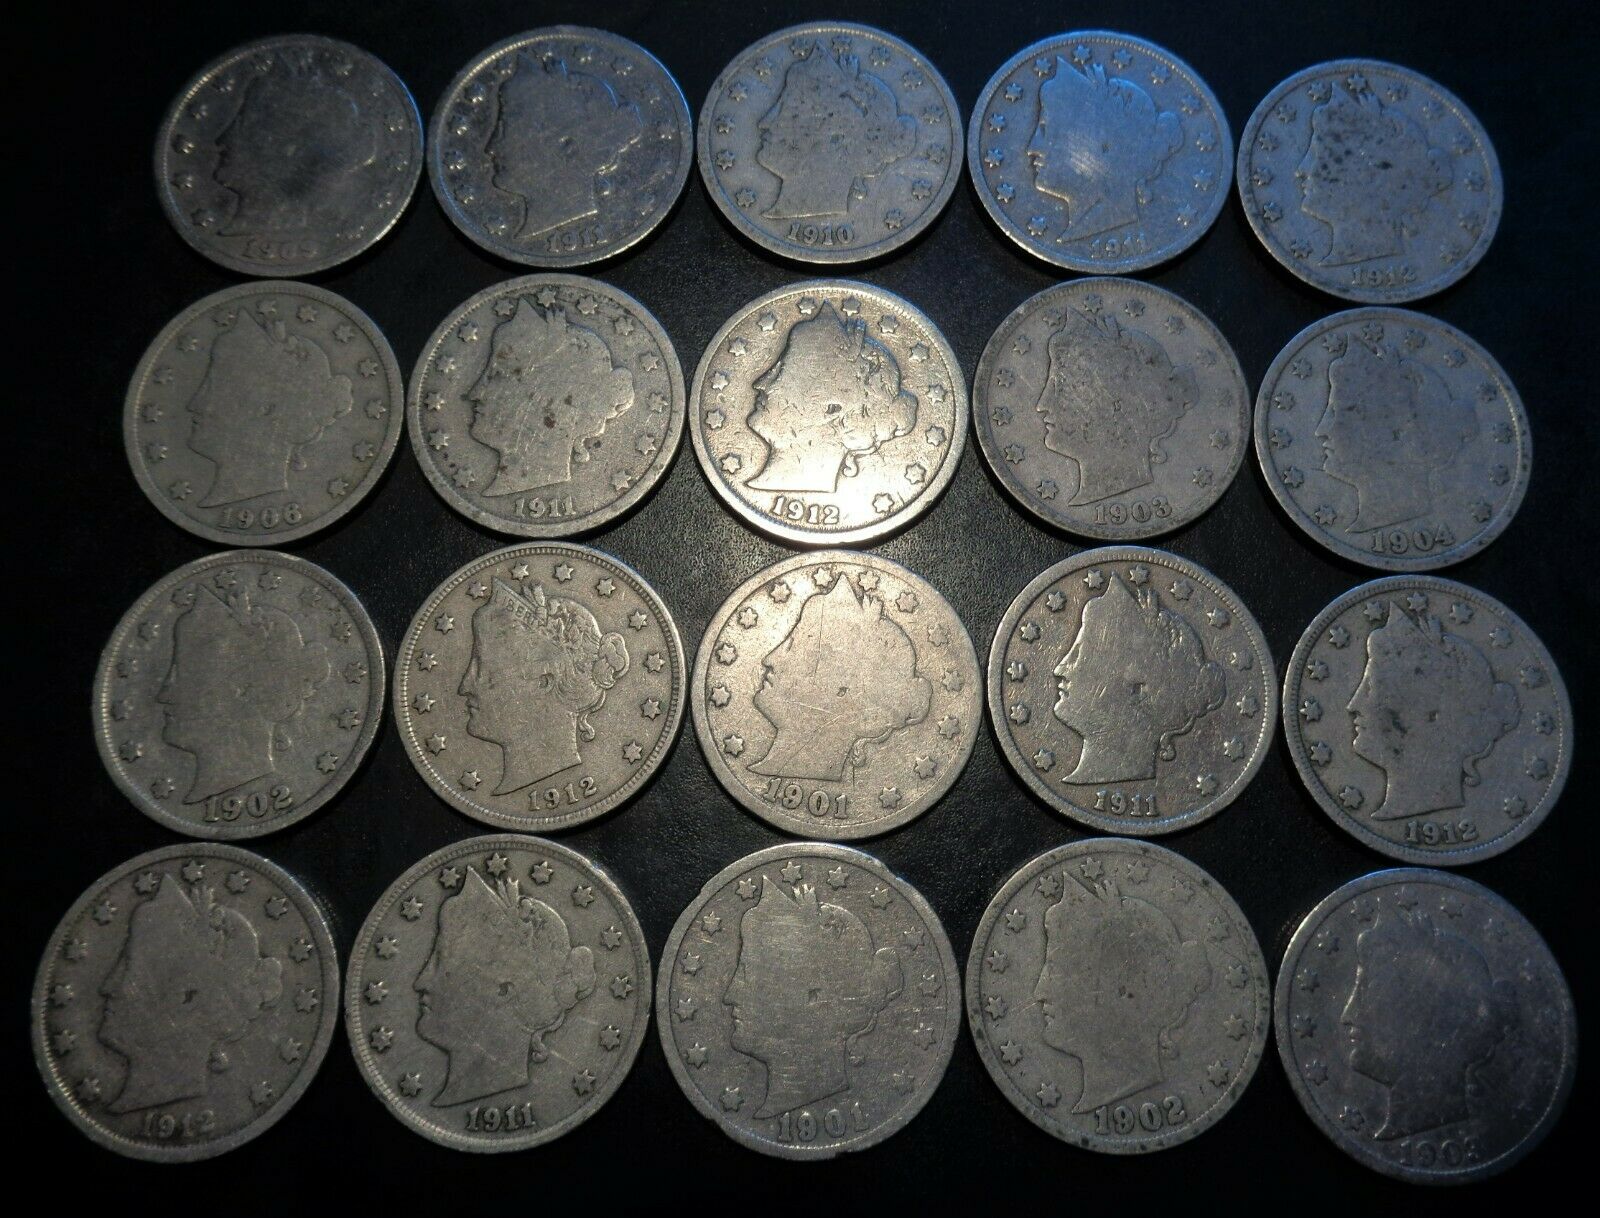 Lot #2) 20 Nice Mixed Date 1900's Liberty Head V Nickel Coin Lot Nr Auction!